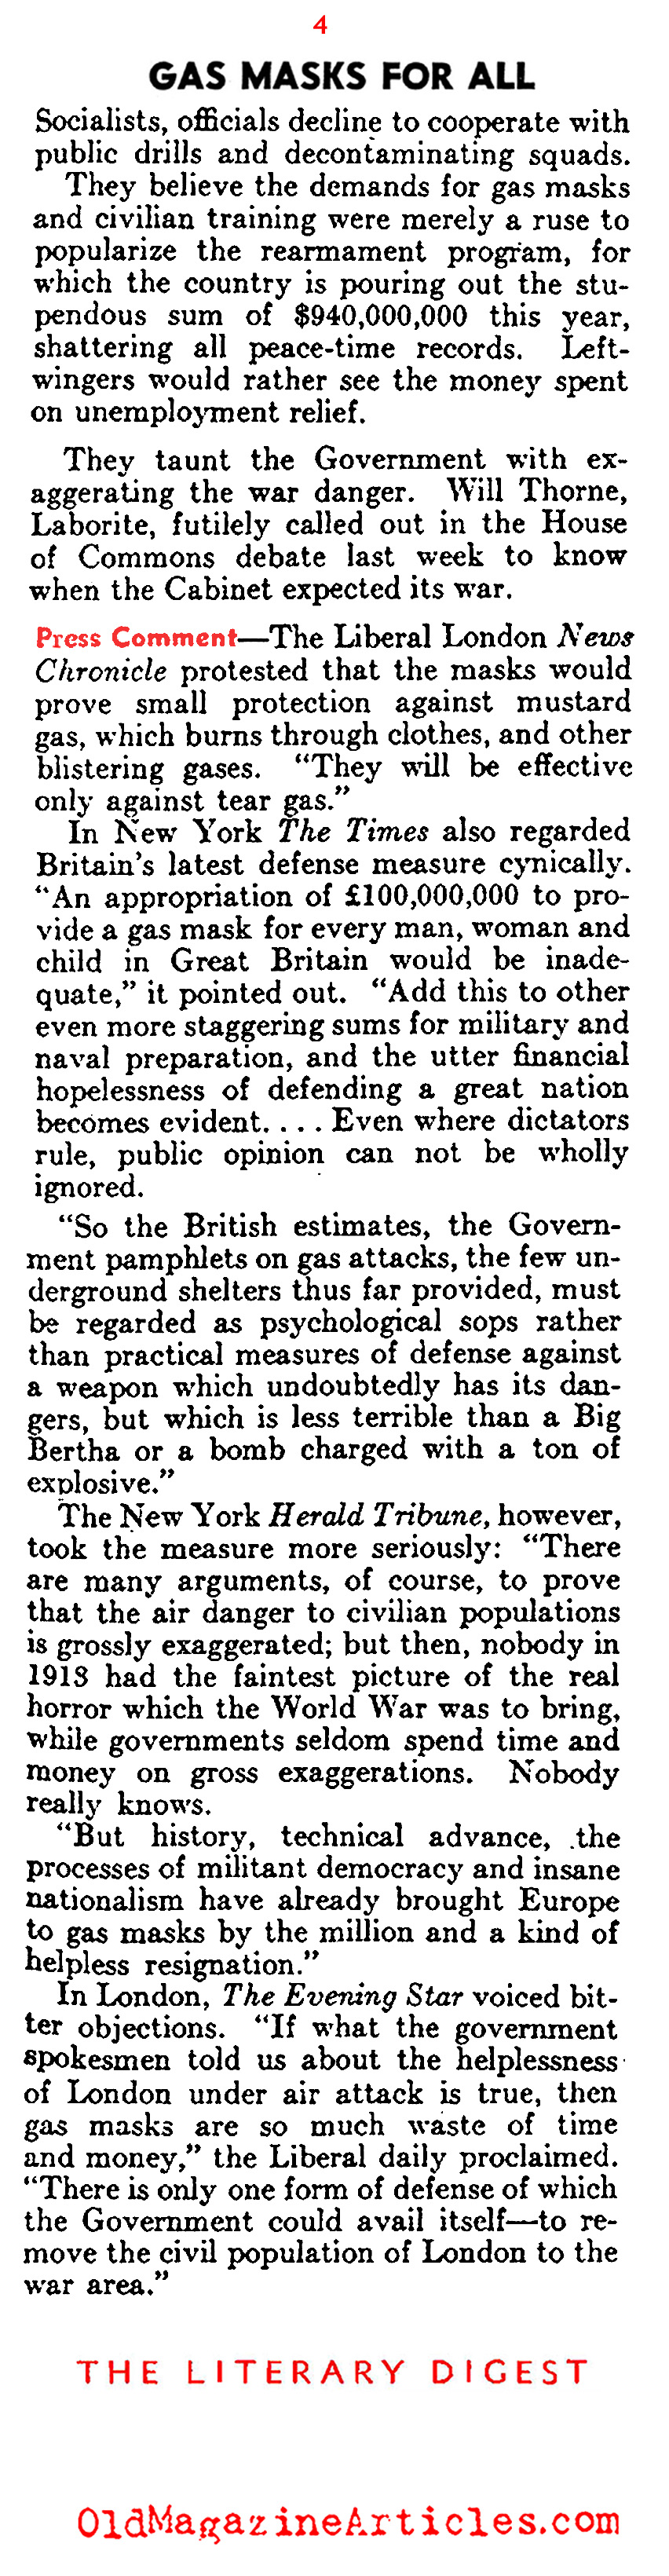 British Civilians Trained to Use Gas Masks (The Literary Digest, 1936)